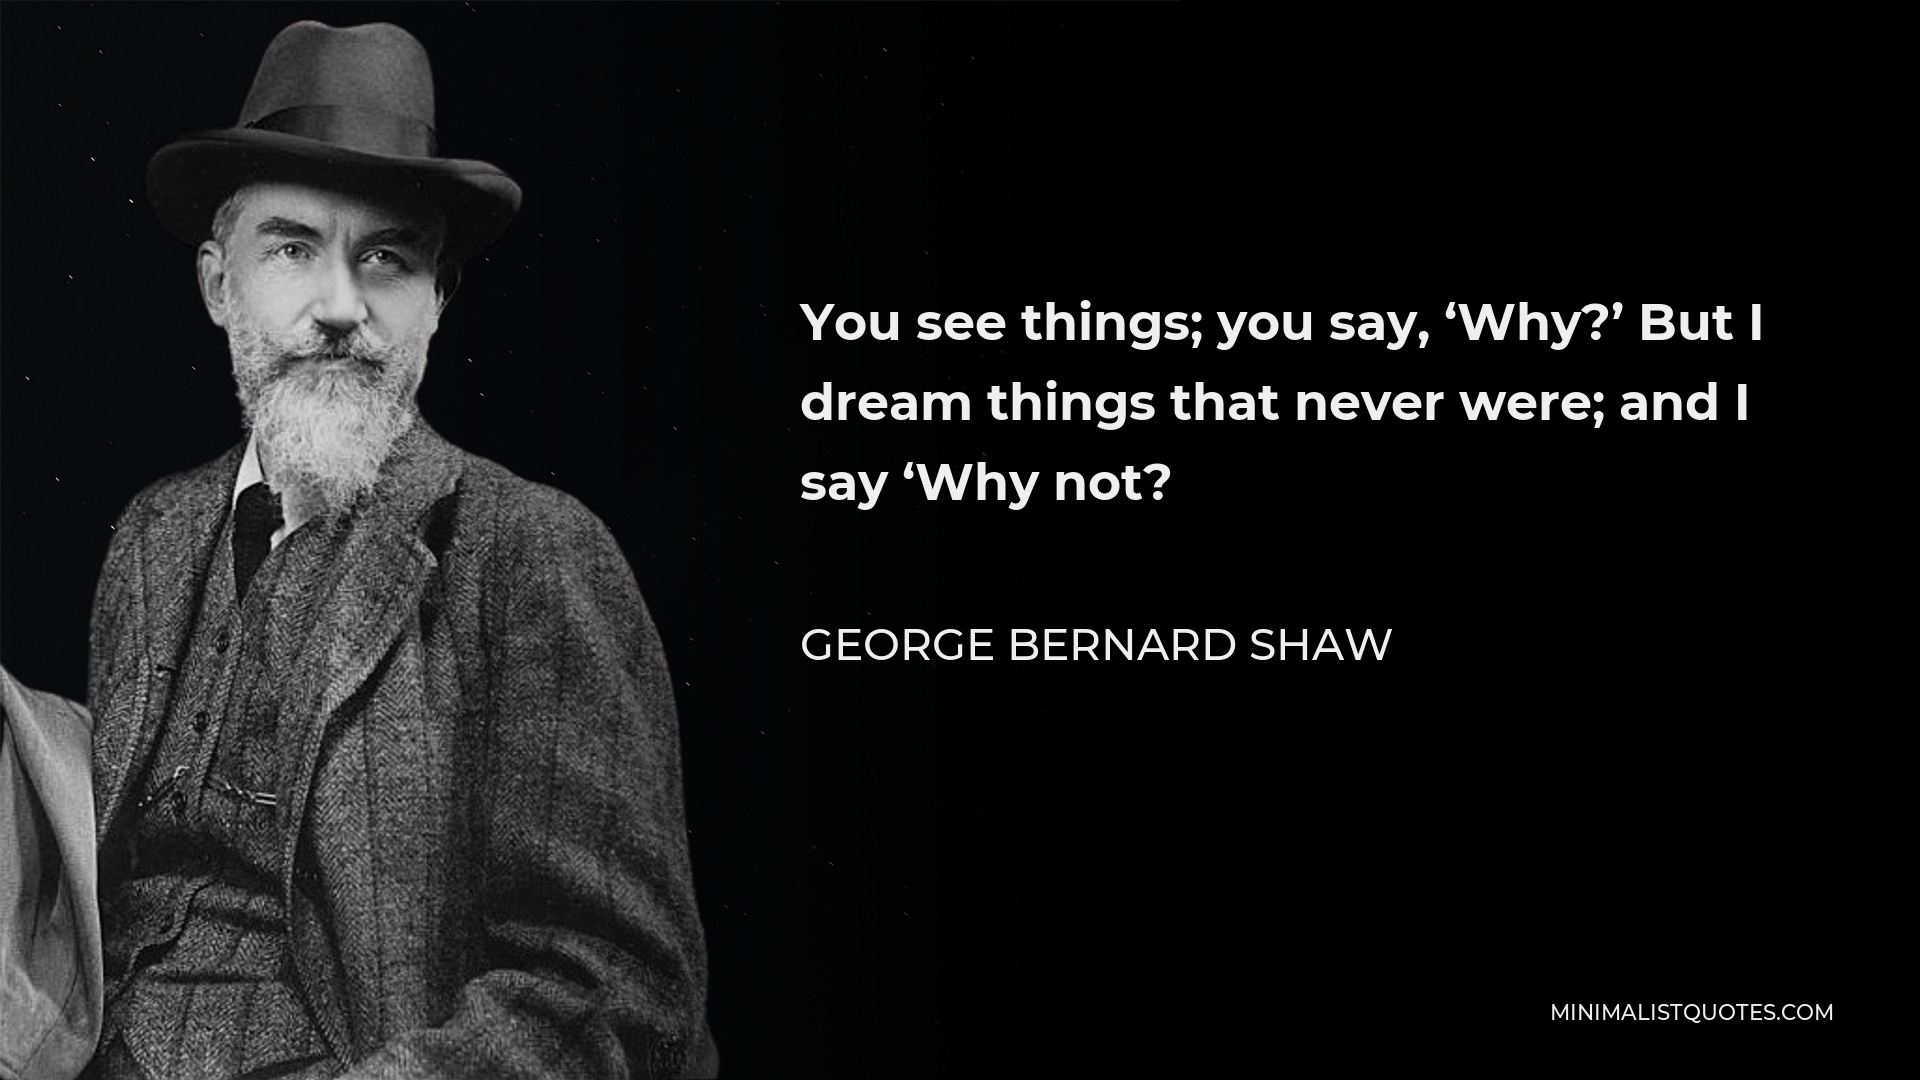 George Bernard Shaw Quote - You see things; you say, ‘Why?’ But I dream things that never were; and I say ‘Why not?